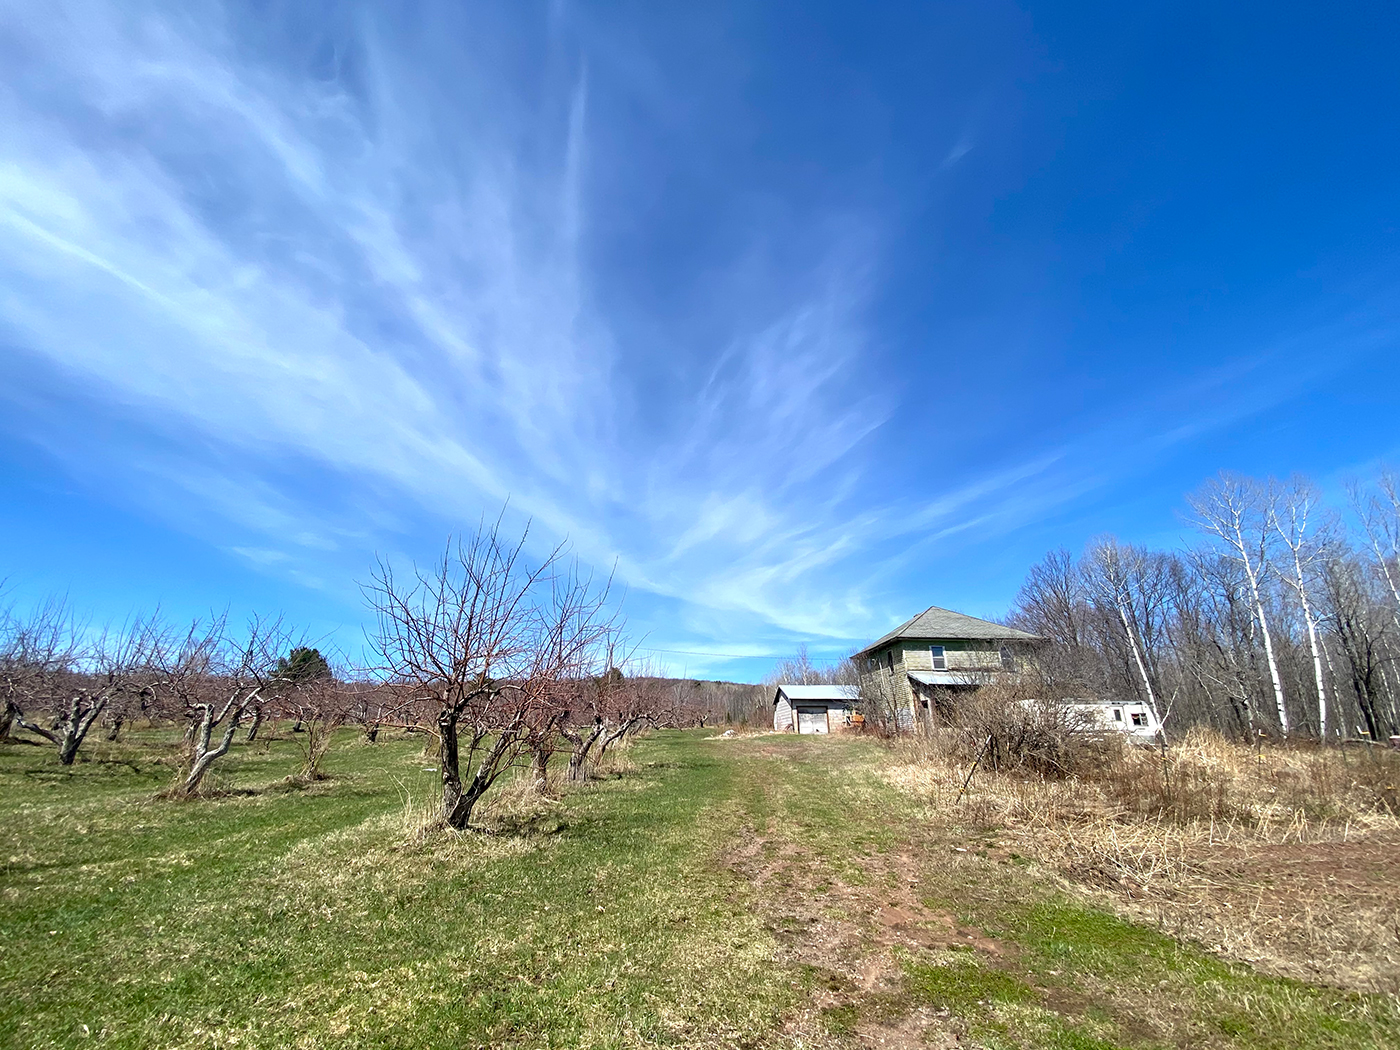 View of a house in the middle of nature with a blue sky as background 